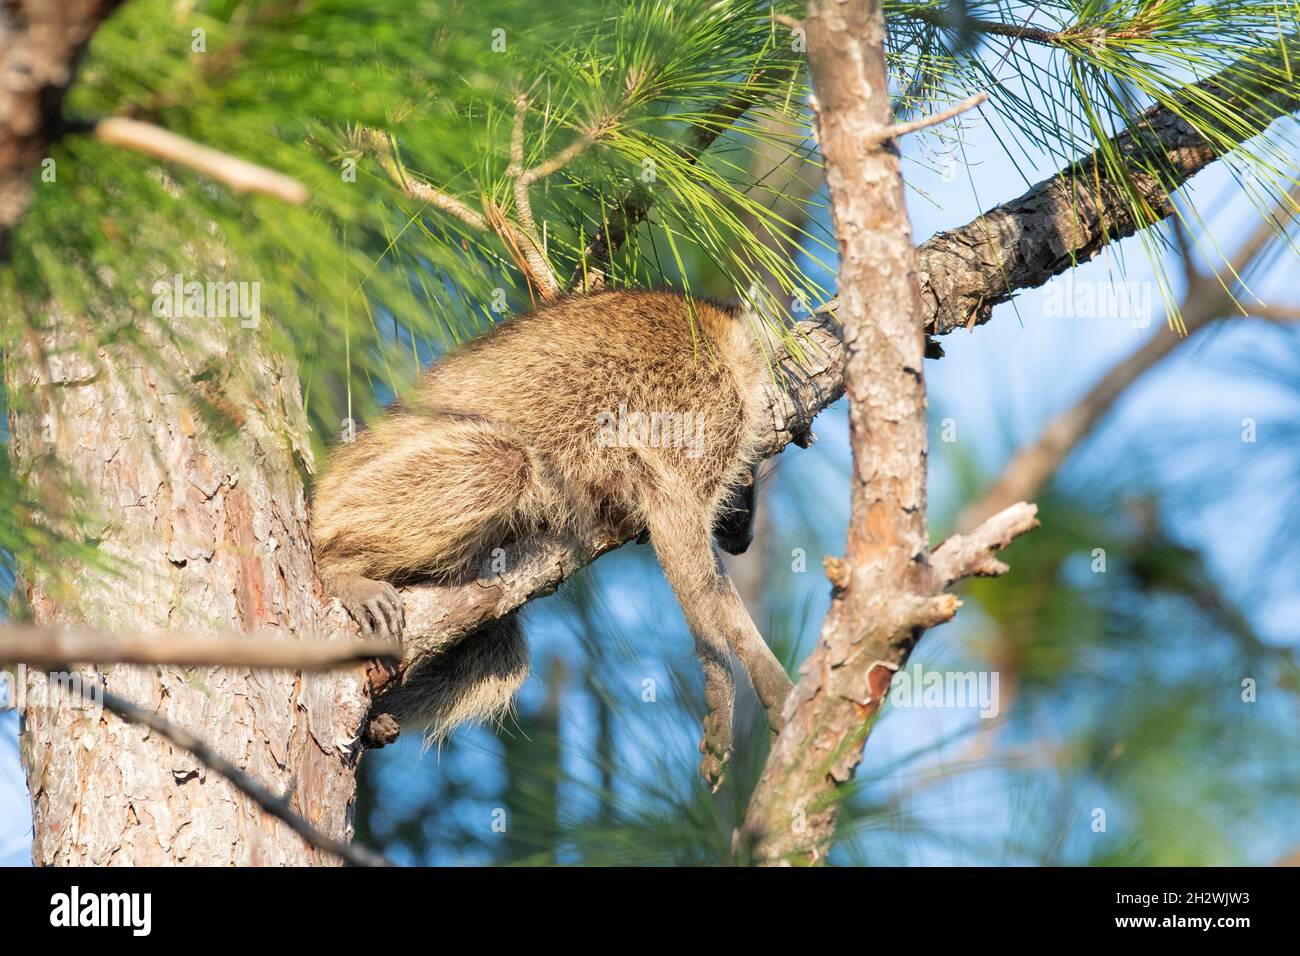 A common raccoon sleeping on a branch of a pine tree in St. Augustine, Florida. Stock Photo